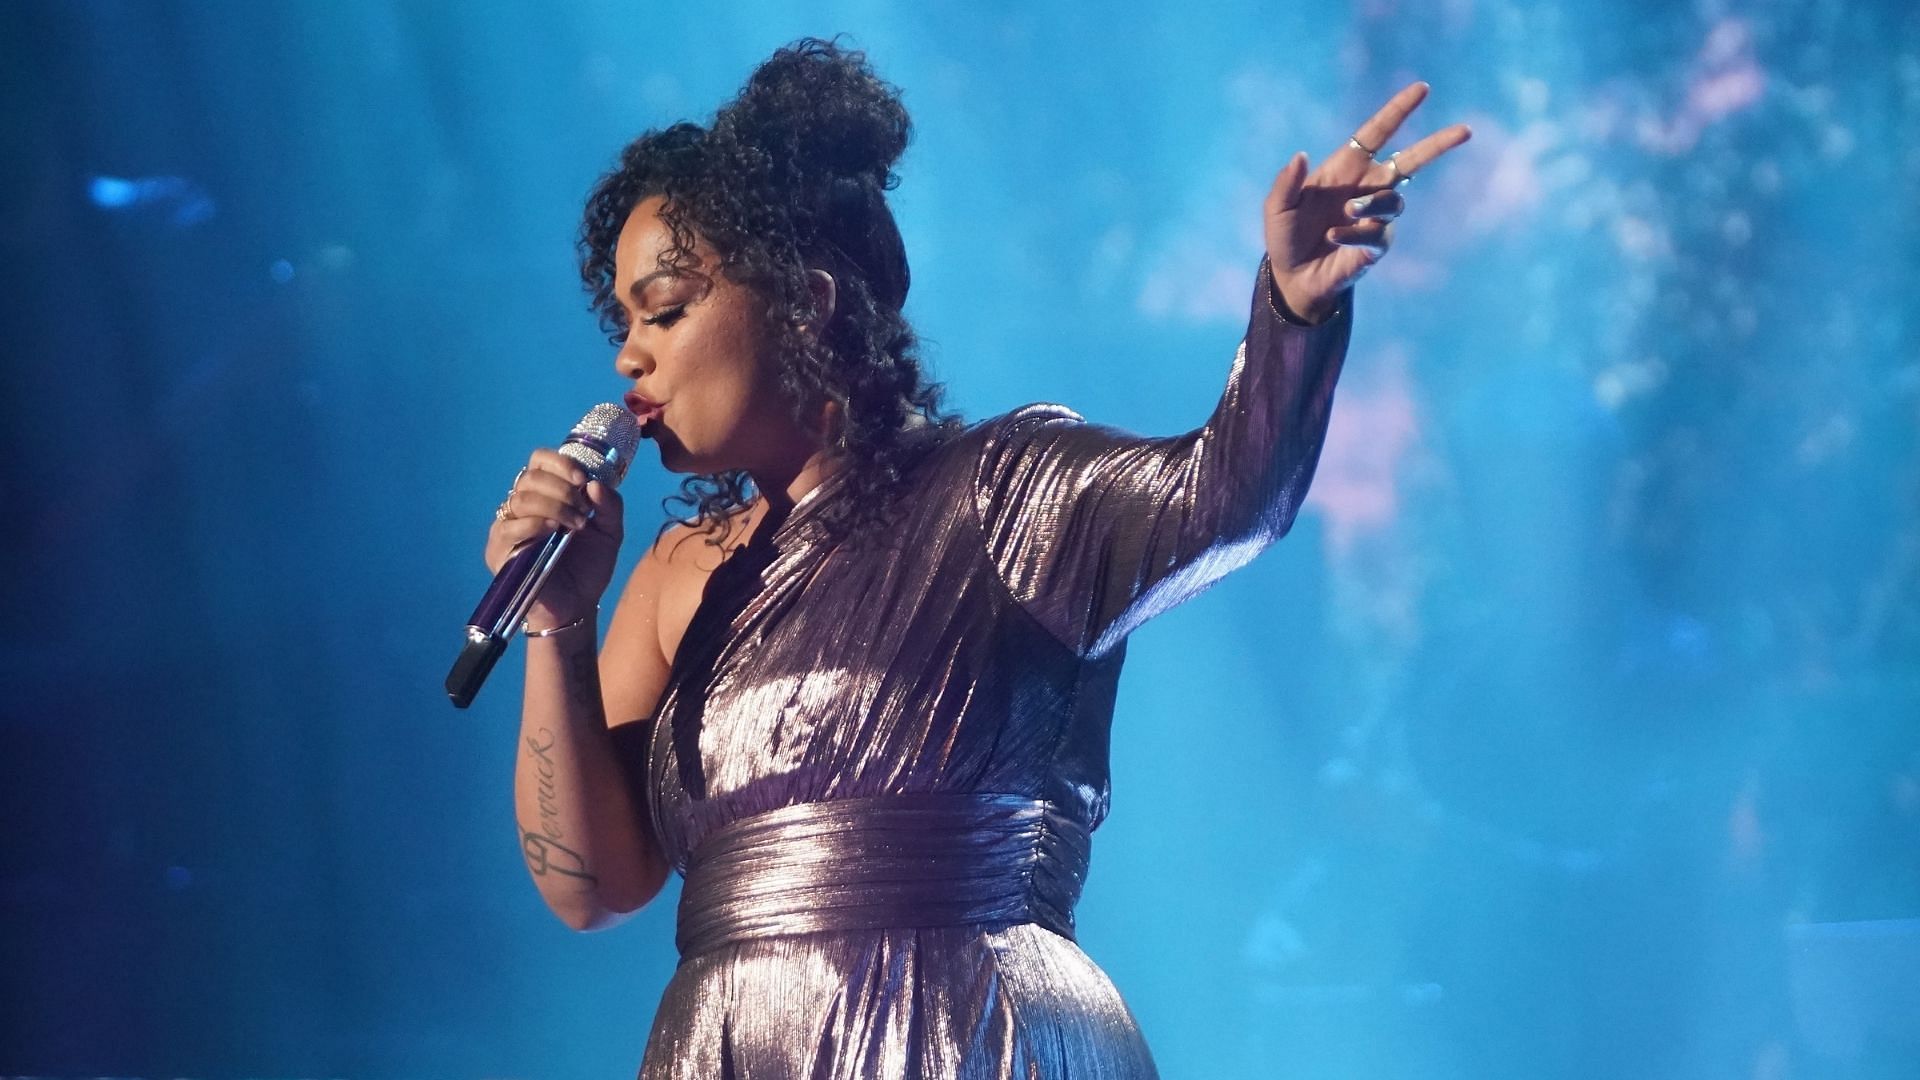 American Idol contestant Lady K&#039;s performance leaves the internet divided (Image via Eric McCandless/ABC)